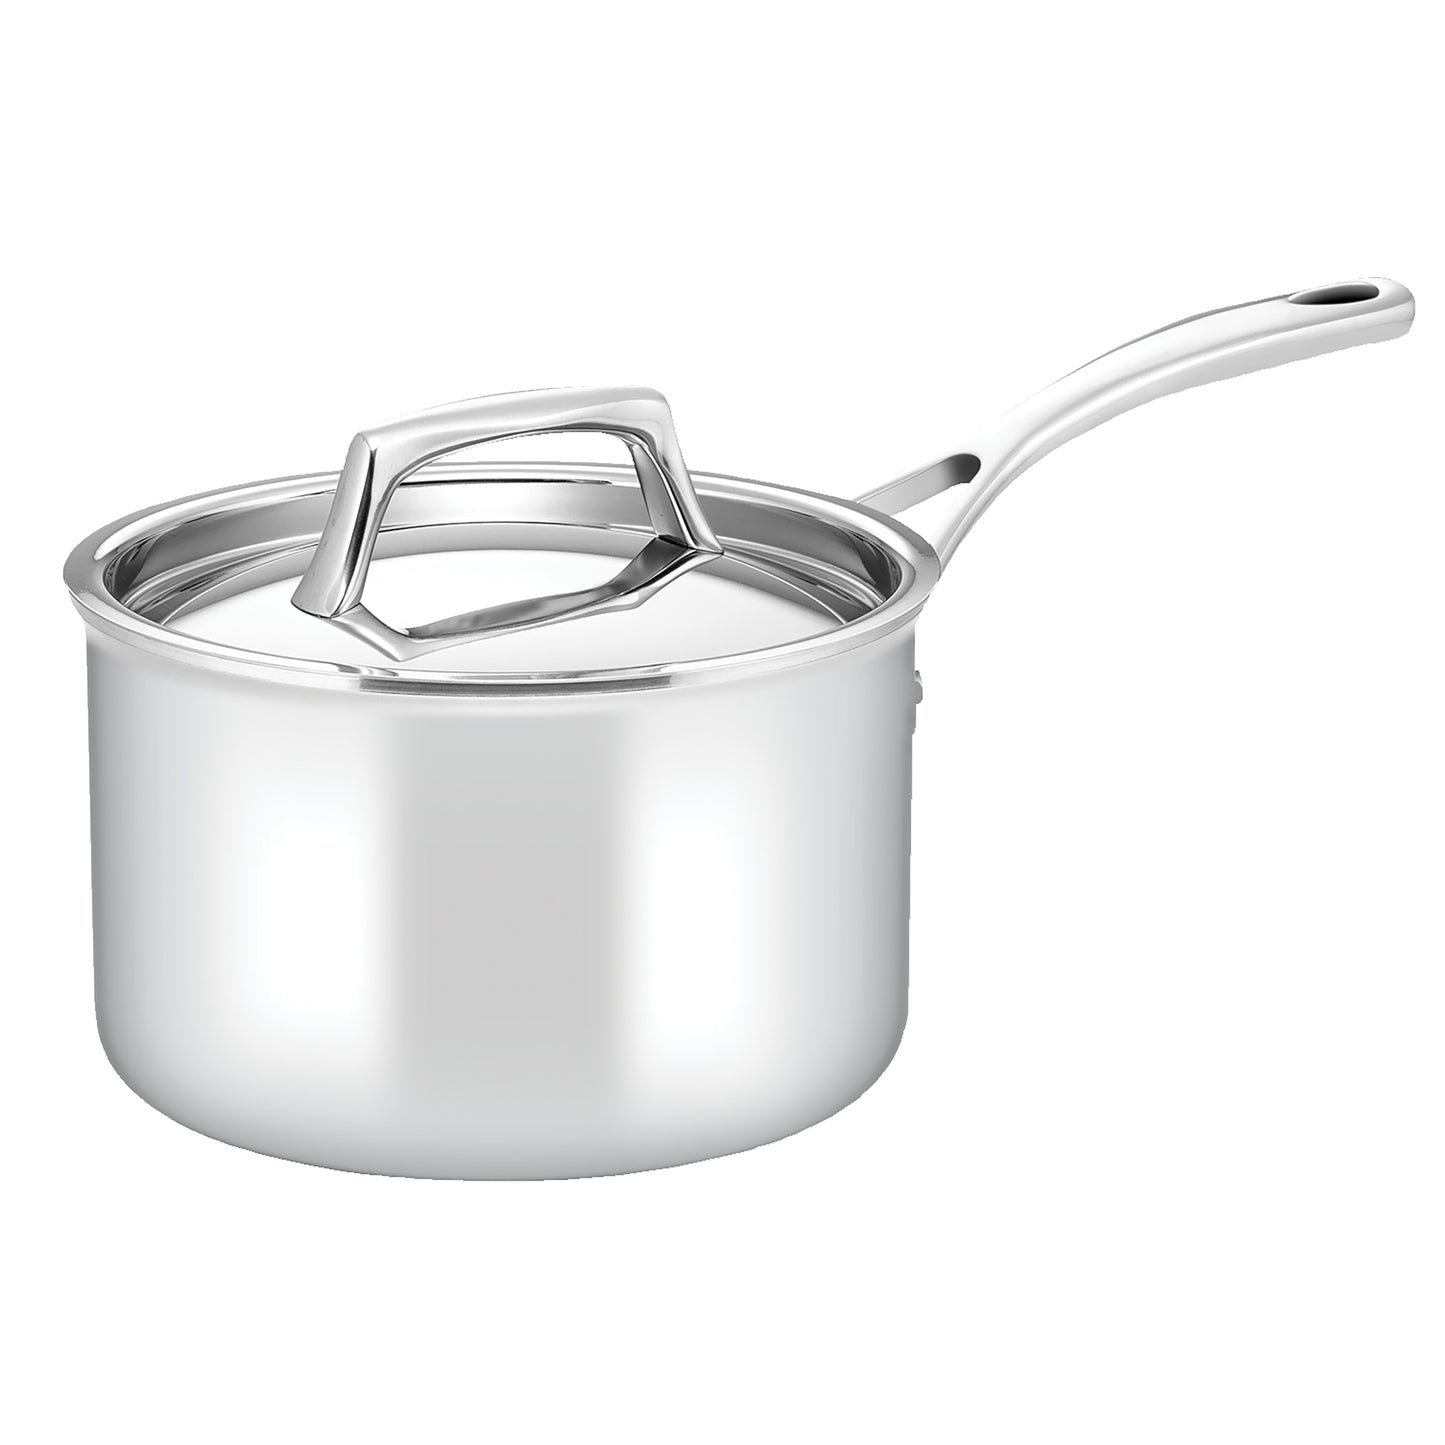 Essteele Per Sempre Clad Stainless Steel Induction Covered Saucepan 18cm/2.8L